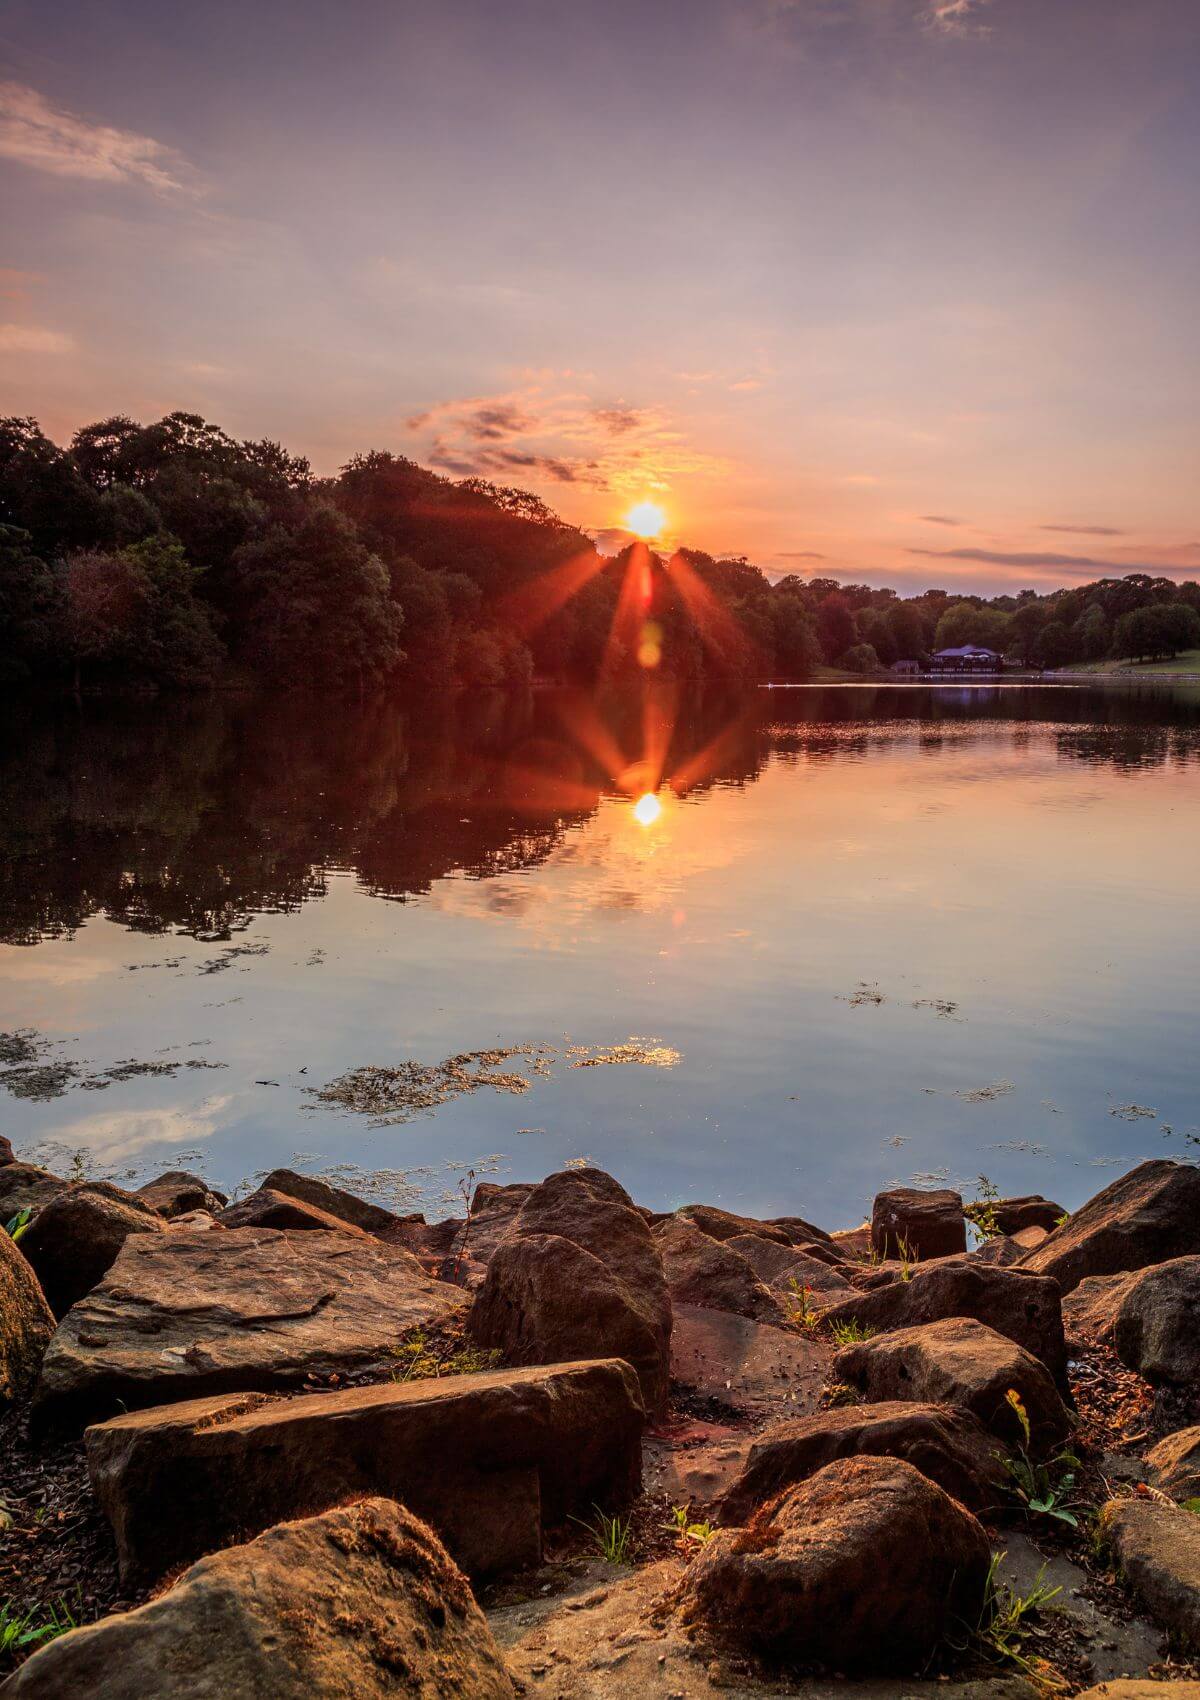 Spend a day out at Roundhay Park in Leeds, one of Europe's biggest city parks